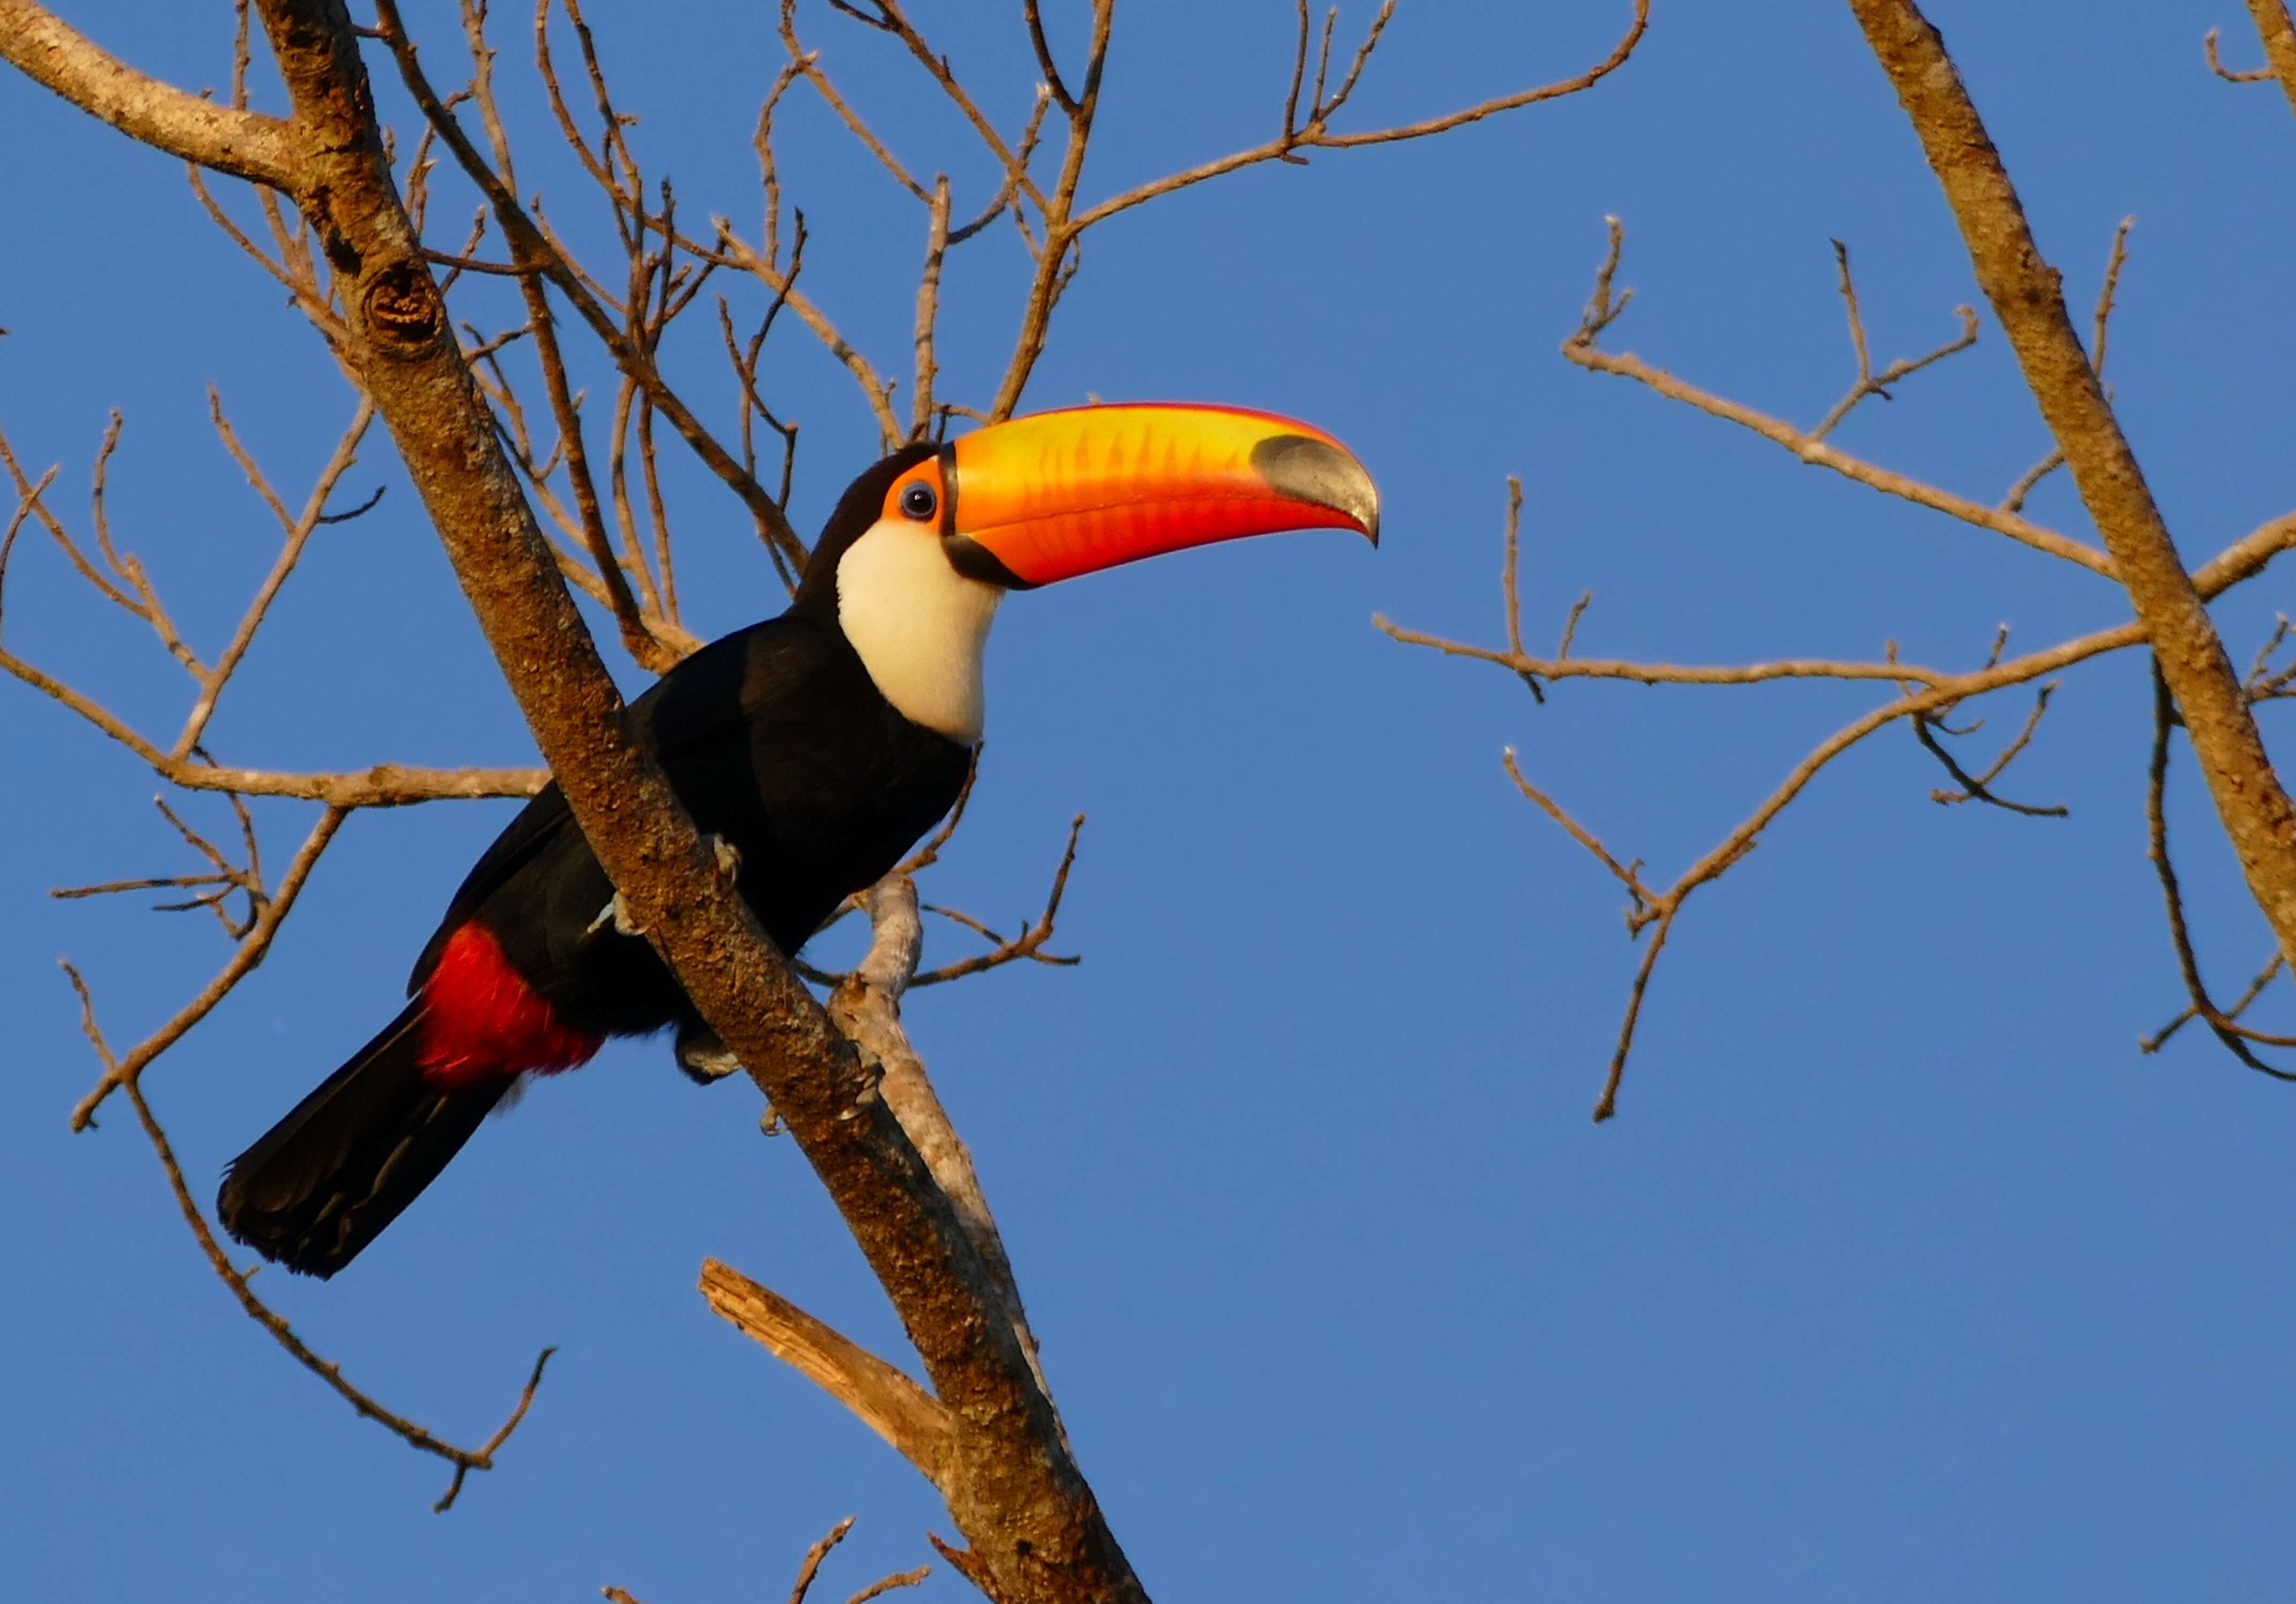 Image of Toucan Sp.